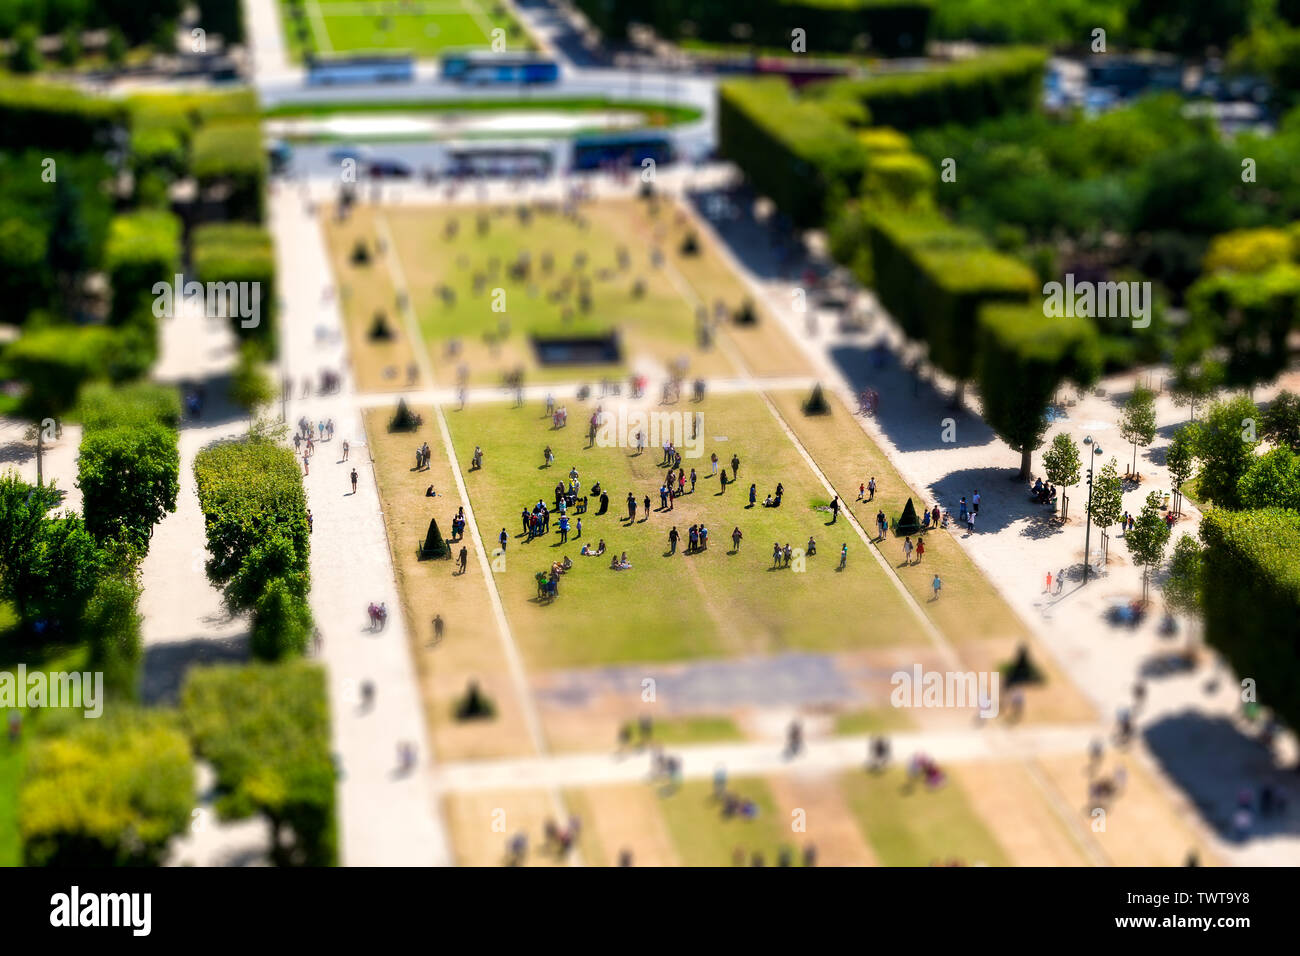 A miniature model of a scene taken from the Eiffel tower in Paris, France. Stock Photo